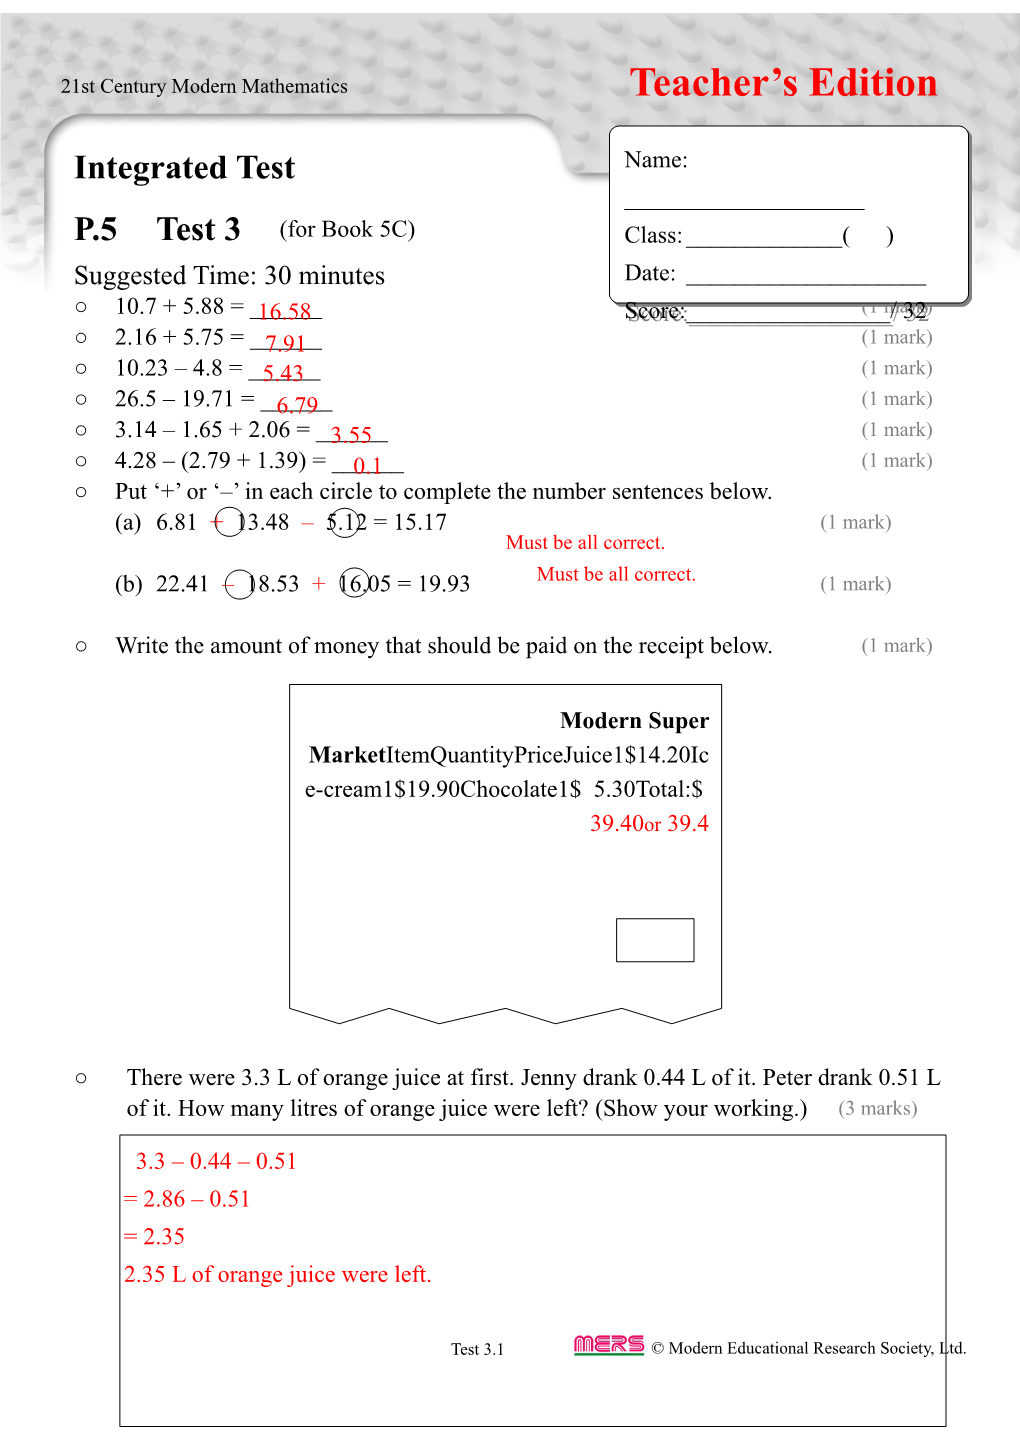 Integrated Test in TSA Format P.5 Test 3